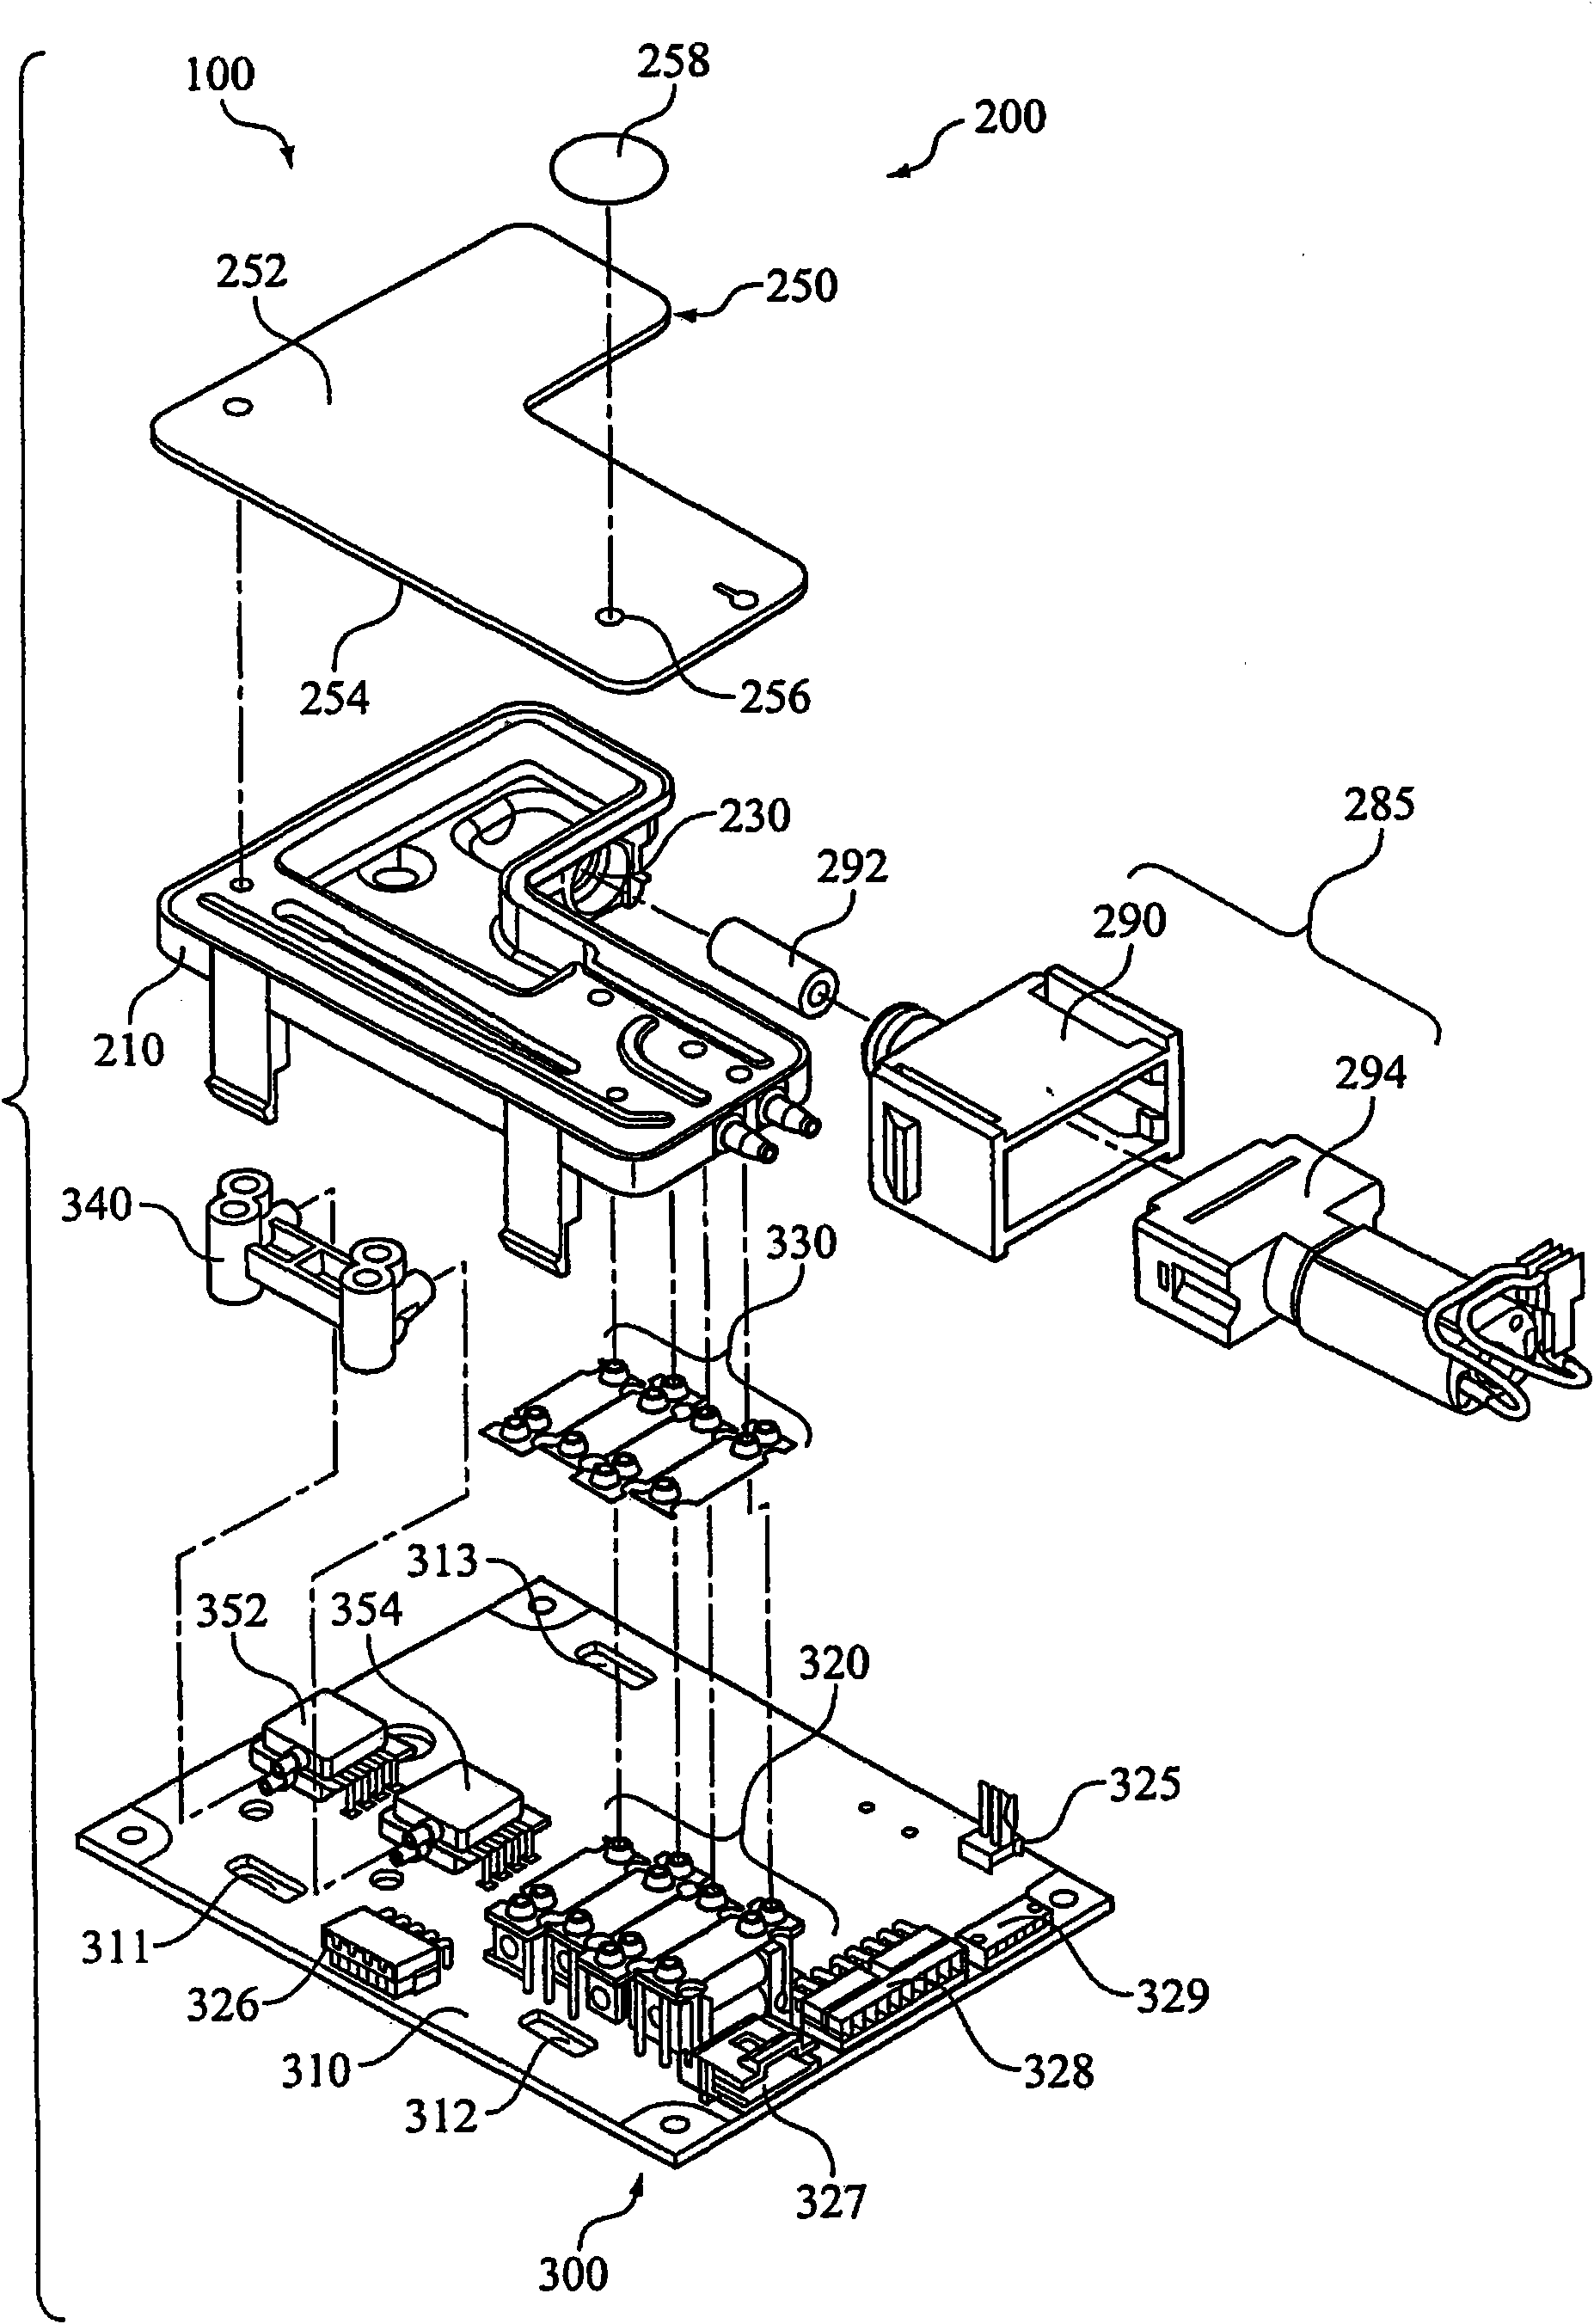 Electro-pneumatic assembly for use in a respiratory measurement system